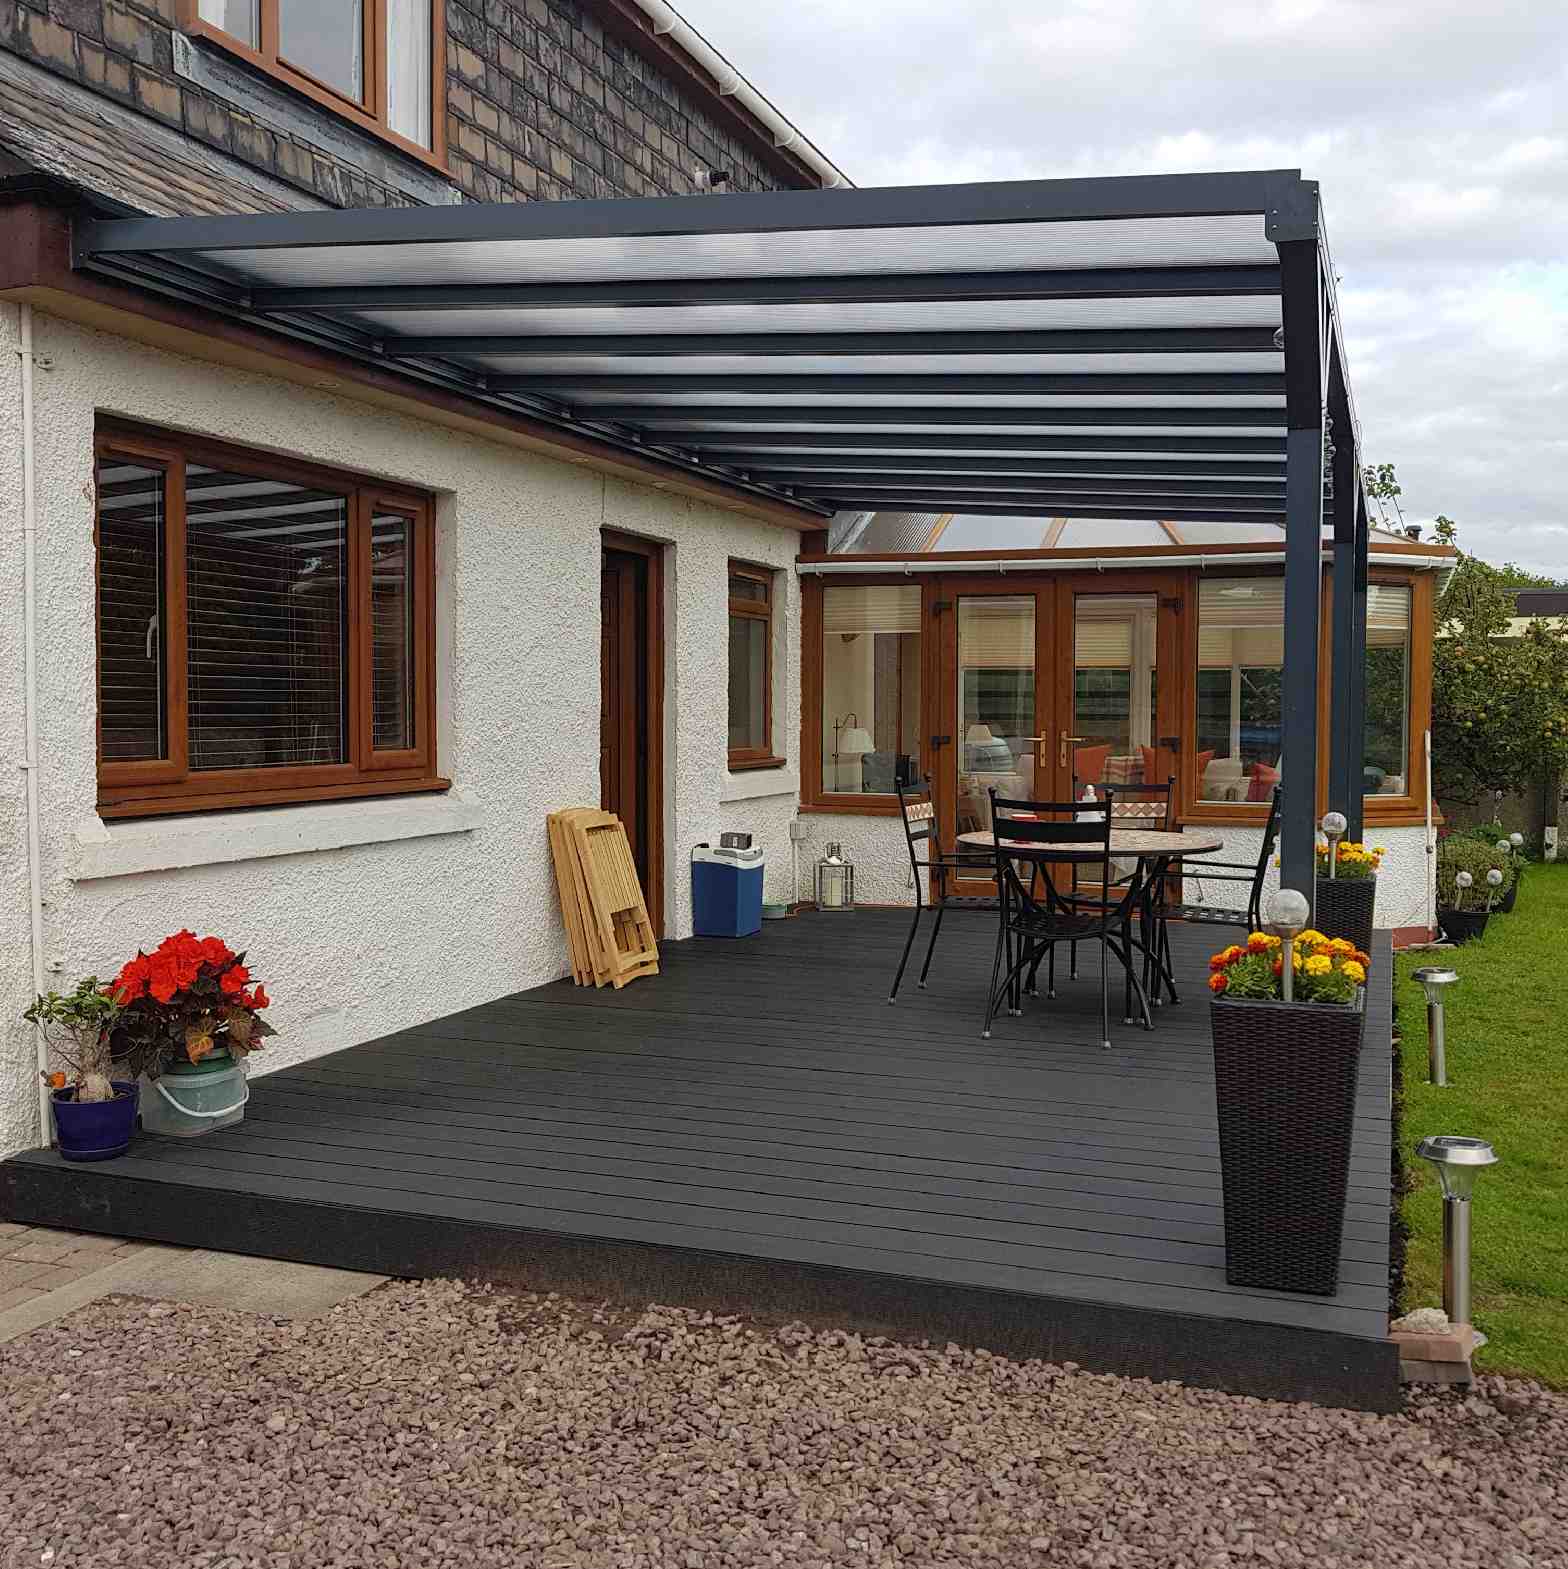 Buy Omega Verandah, Anthracite Grey, 16mm Polycarbonate Glazing - 12.0m (W) x 2.0m (P), (5) Supporting Posts online today